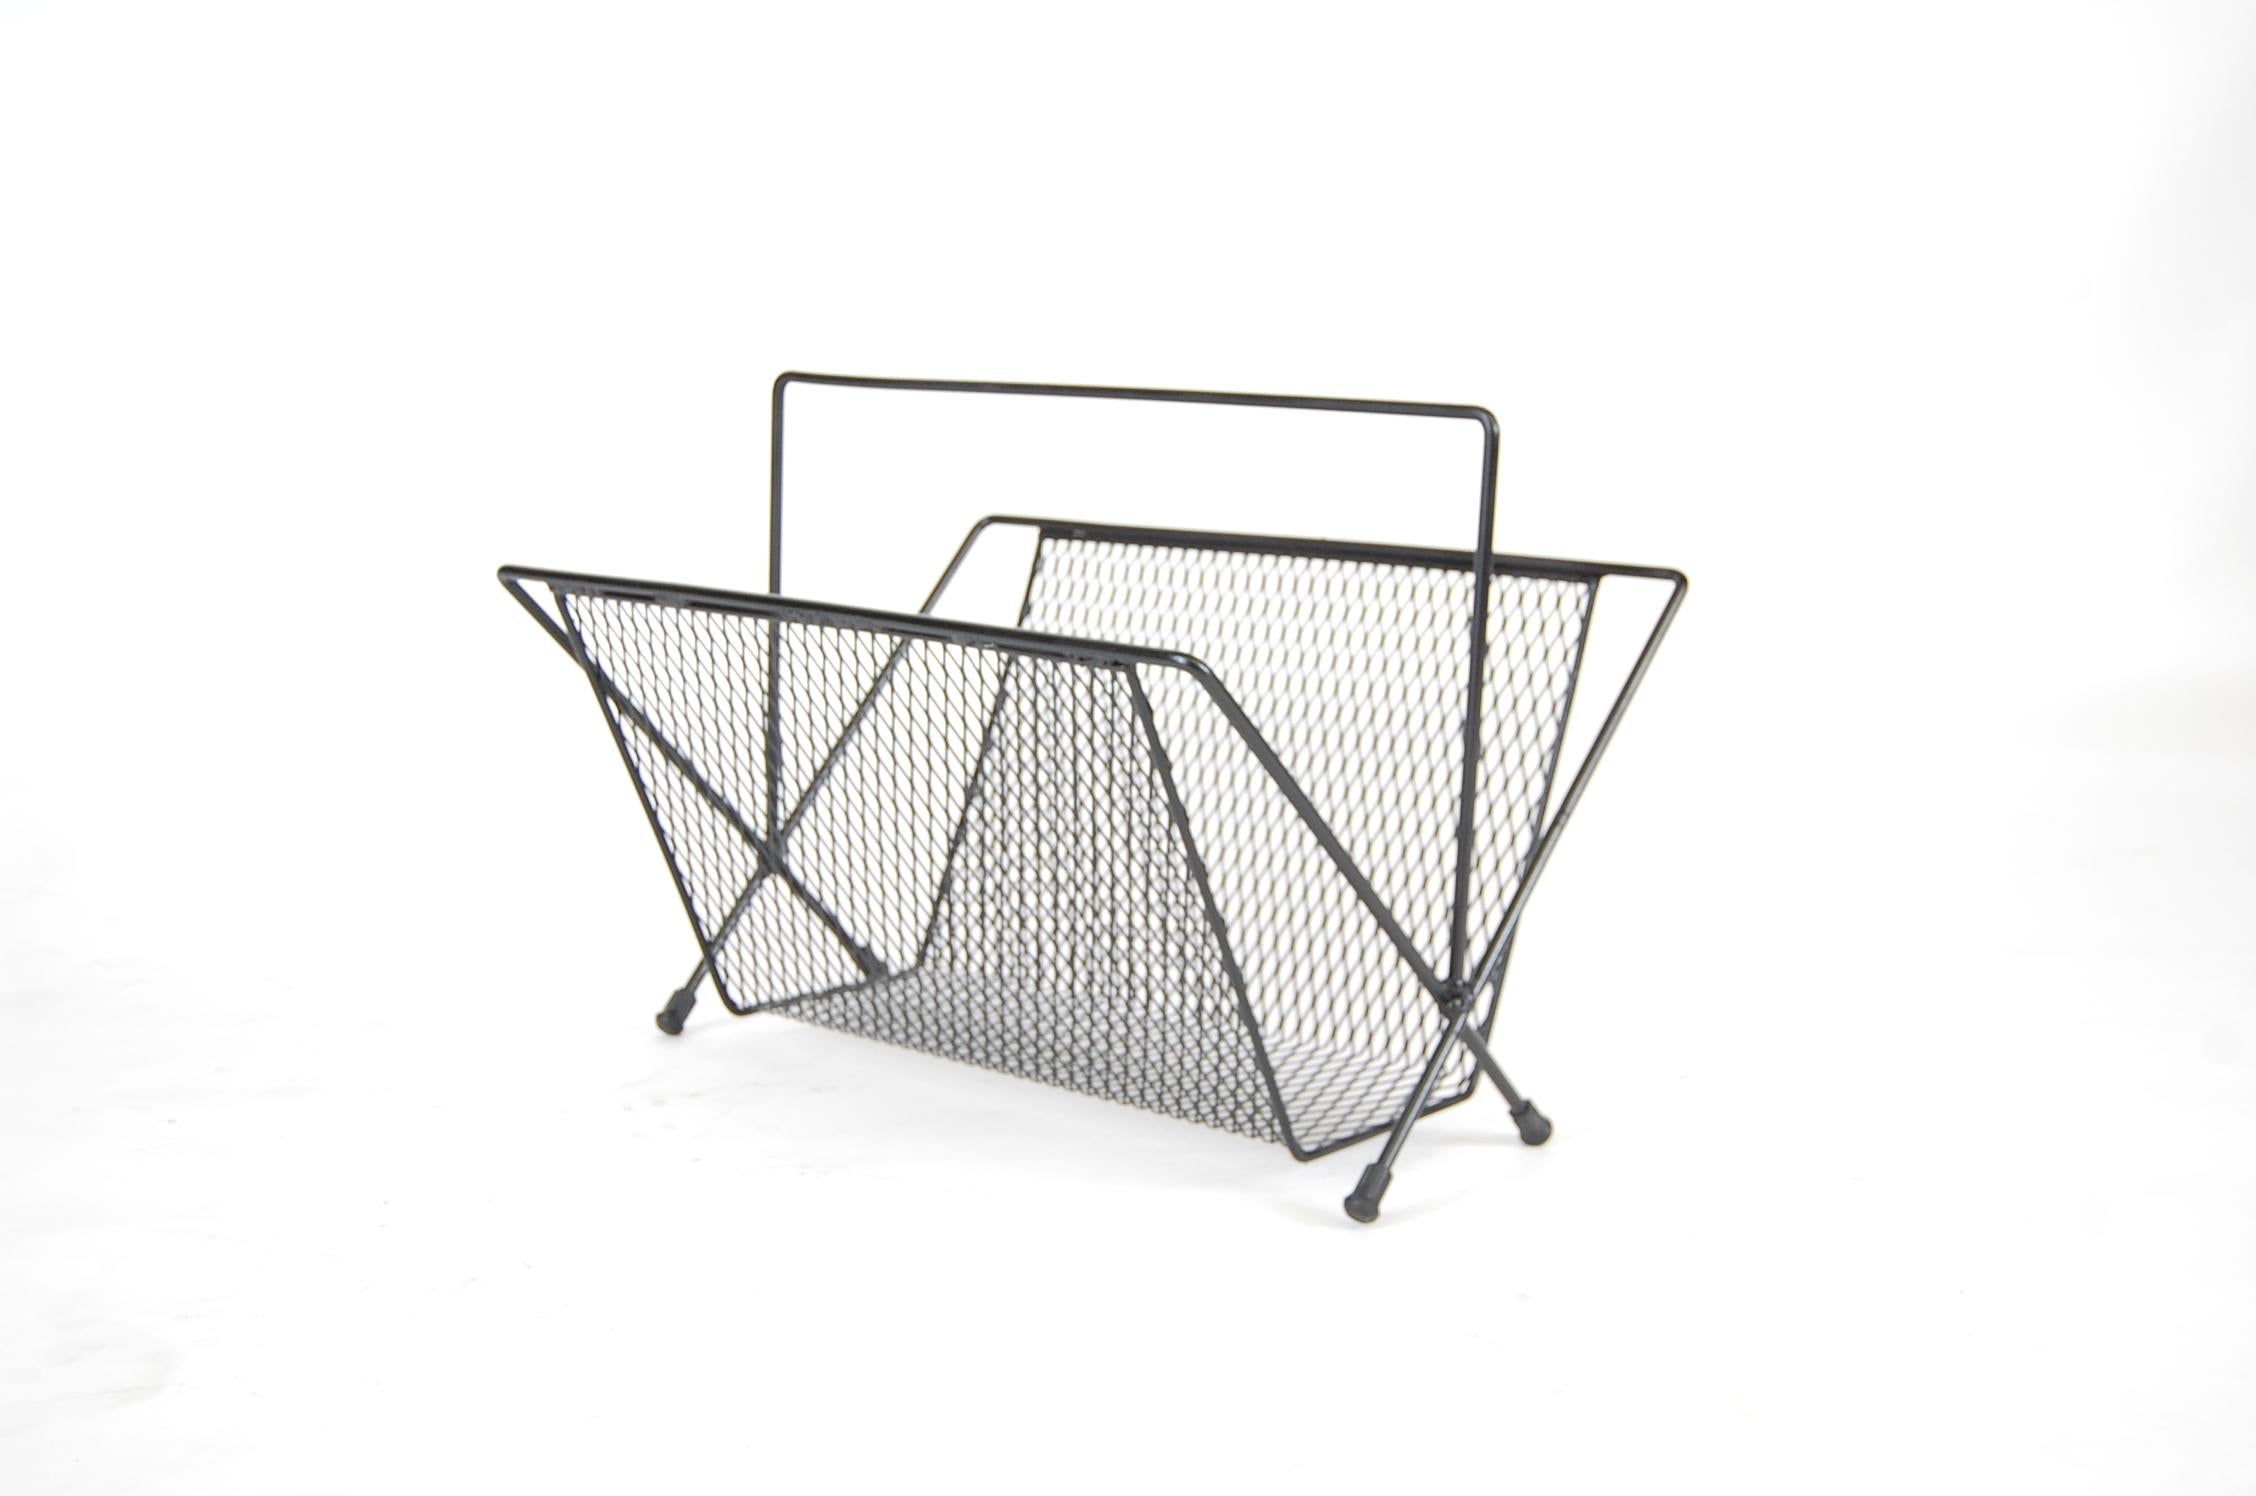 Large magazine rack in the manner of Mathieu Matégot, circa 1955. Most likely American. Constructed of steel rod, perforated steel sheeting, and has rubber boots. Measures: 22 1/4